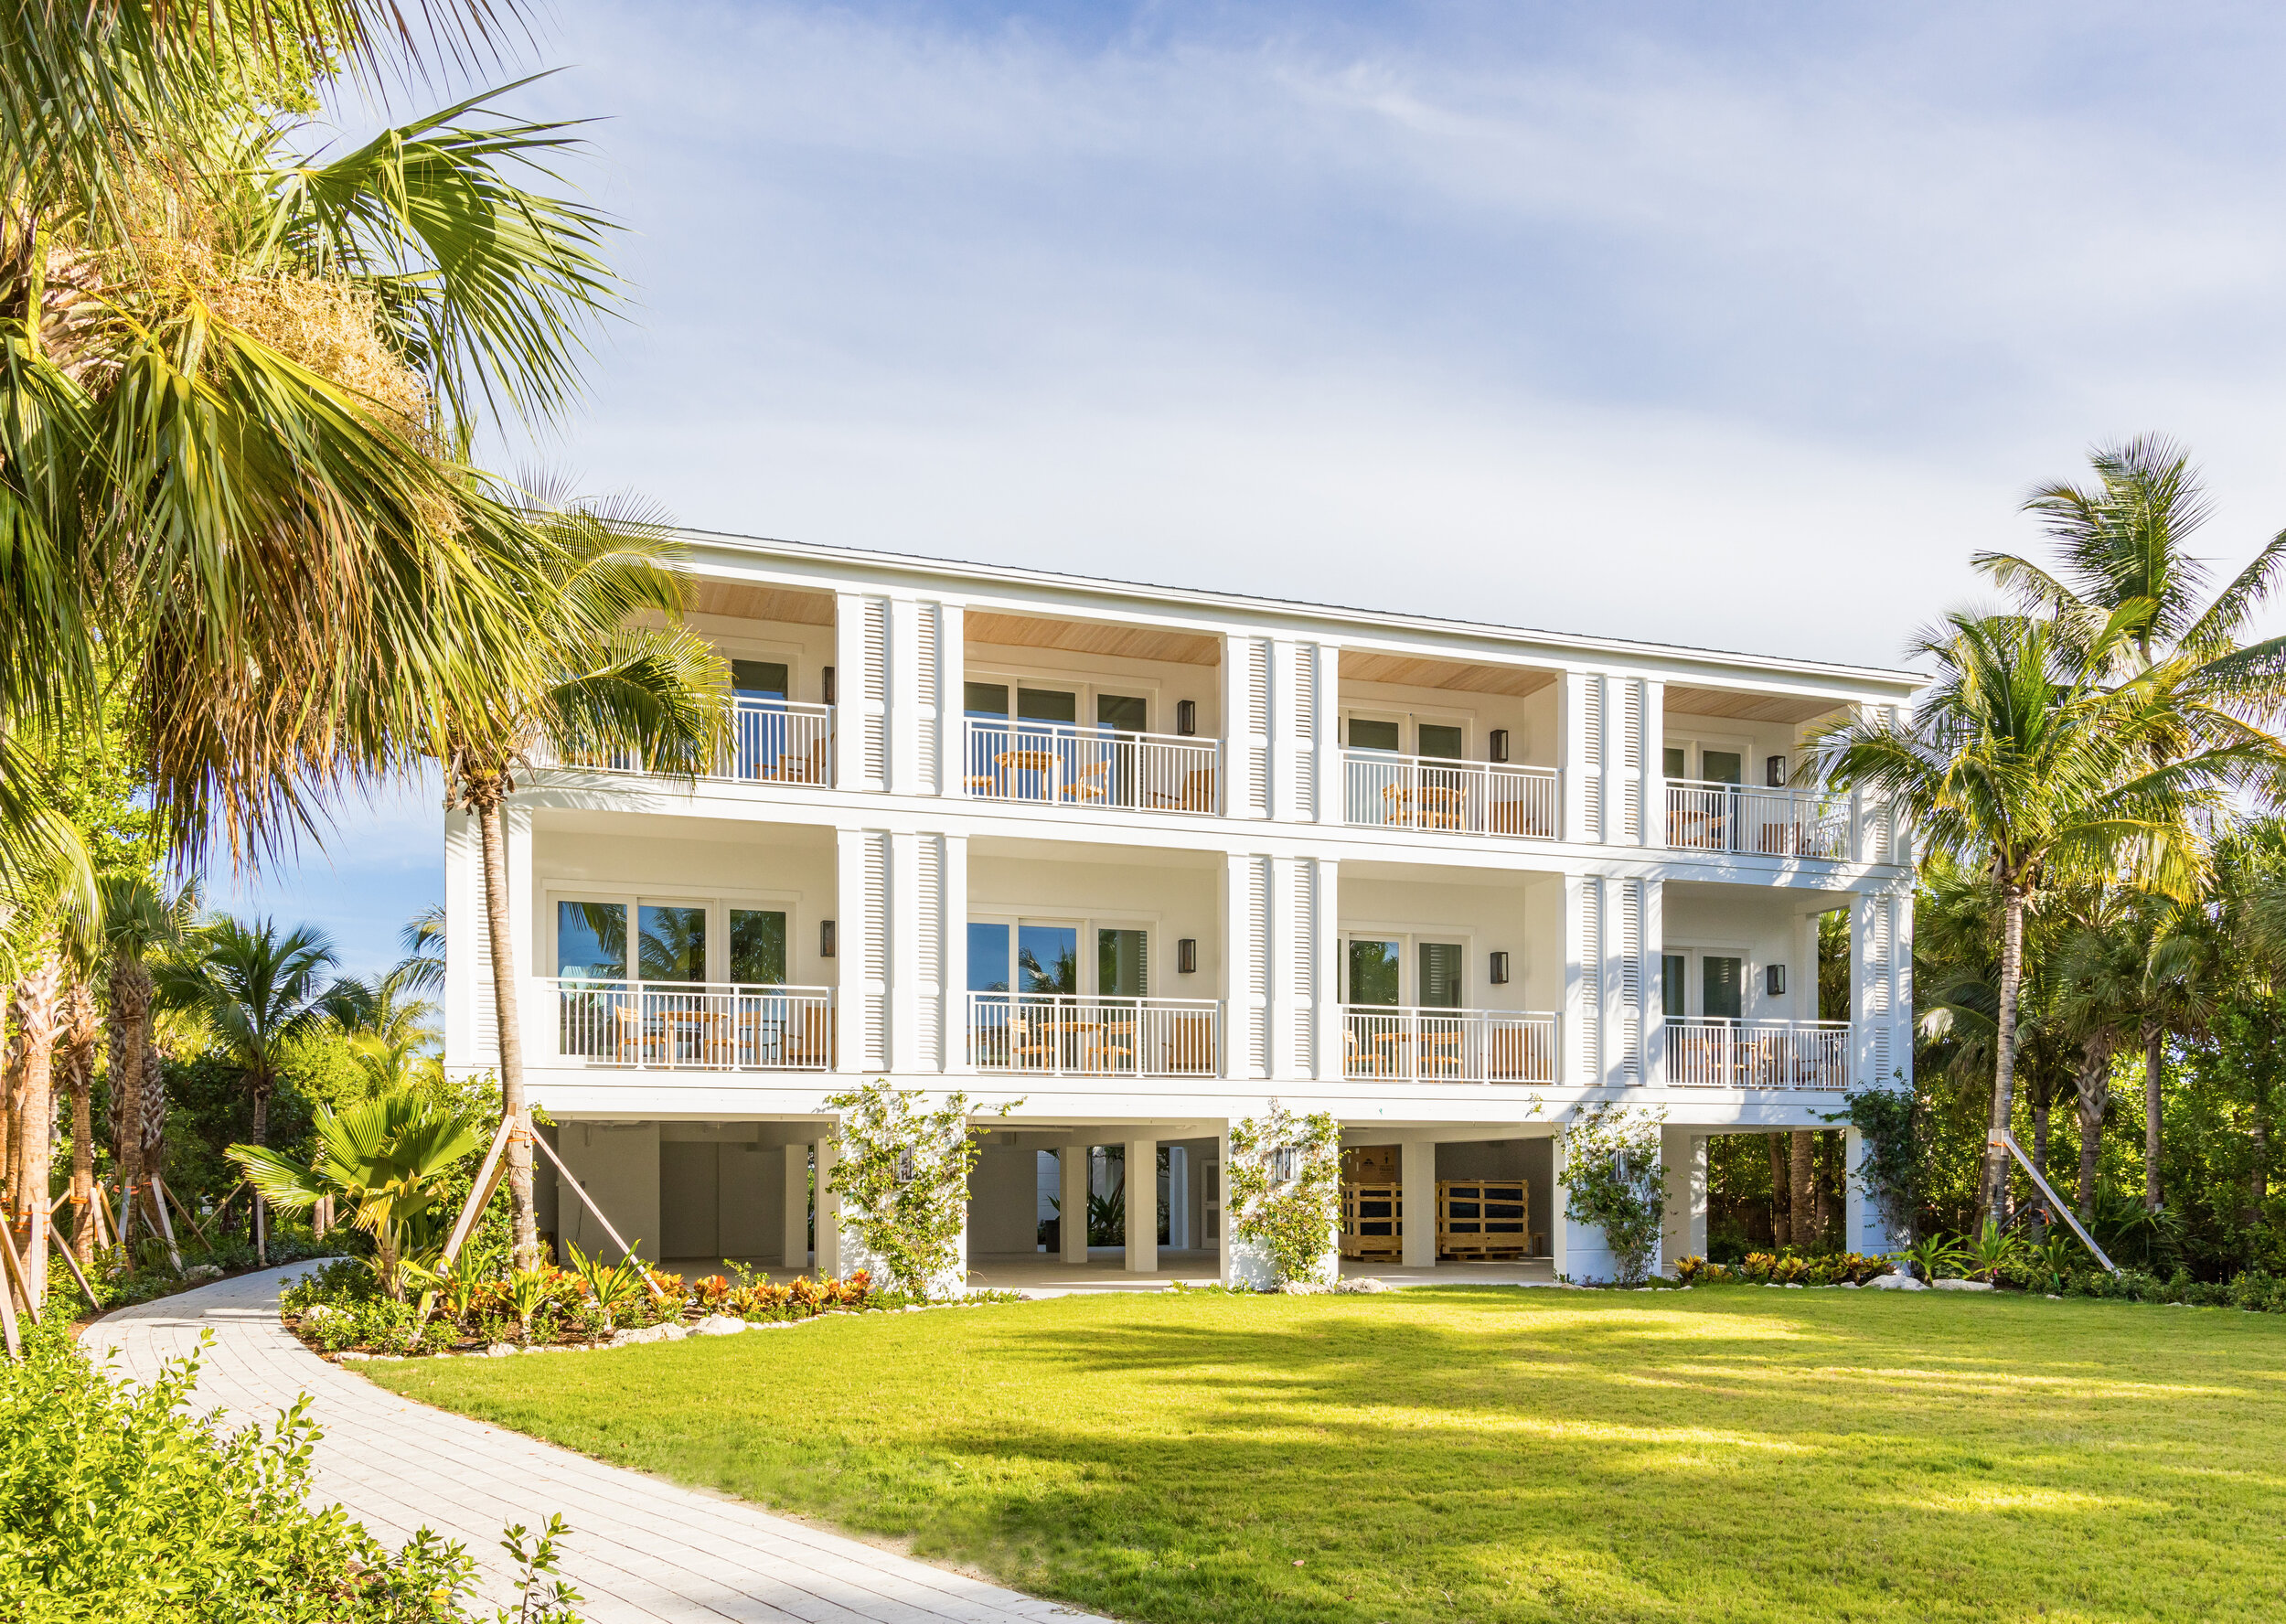  The Islands of Islamorada’s Ocean House suites and event lawn, surrounded by palm trees. 